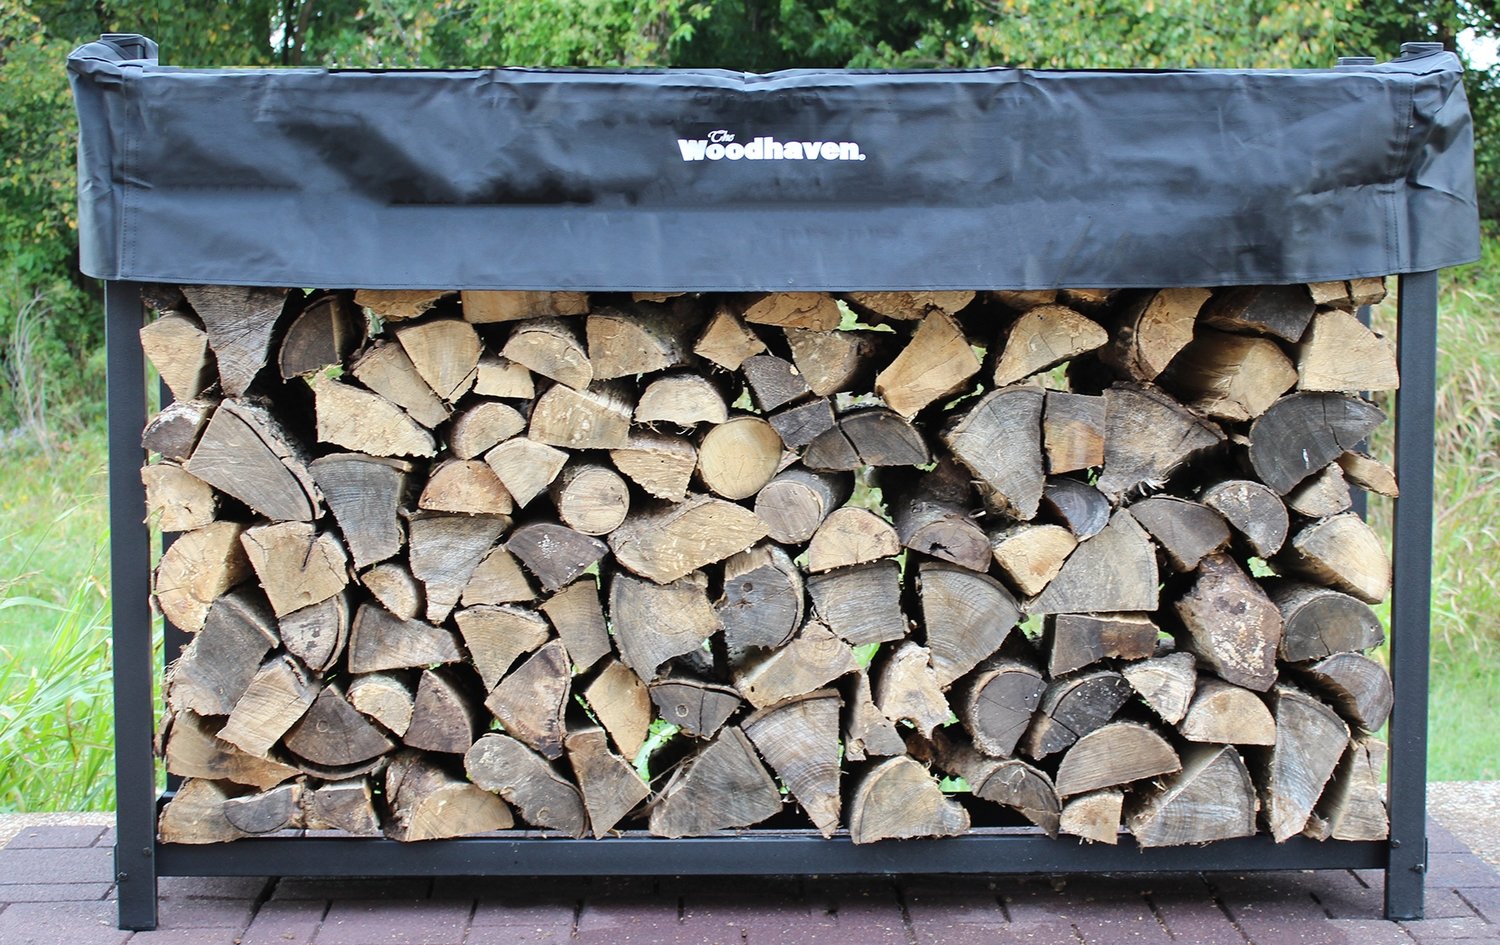 1/3 Cord 6' Woodhaven Firewood Rack and Cover – Woodchuck Firewood LLC